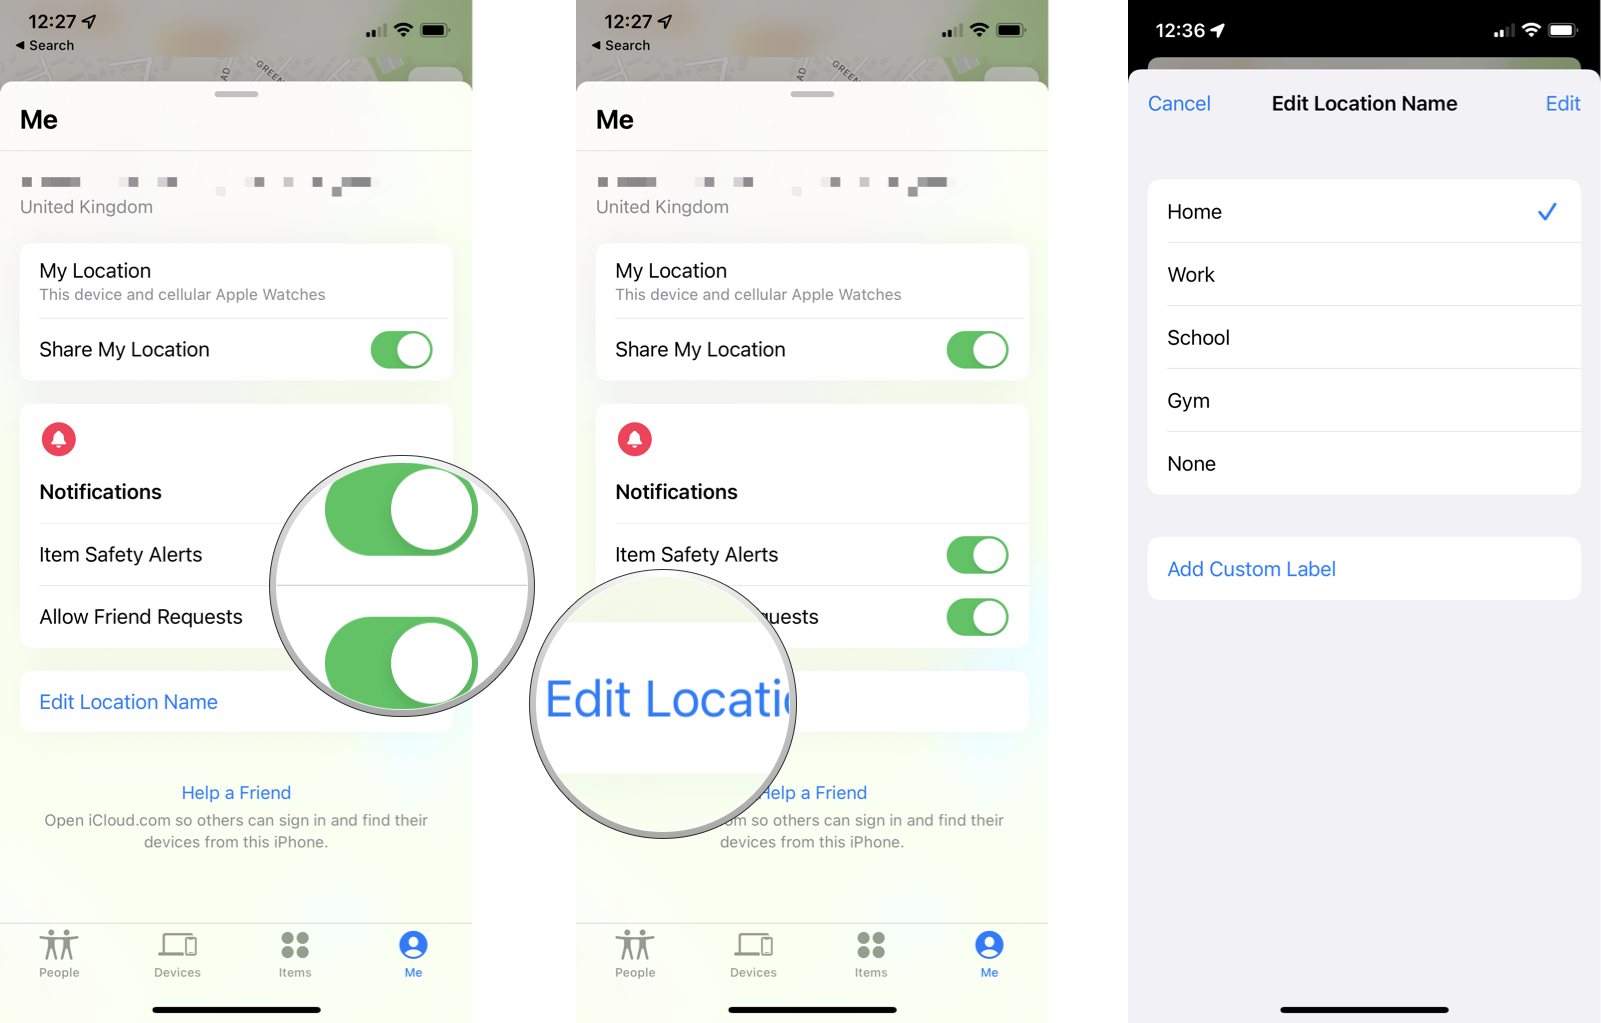 Edit Find My personal settings: Tap switches next to Item Safety Alerts and Allow Friend Requests to set these on or off, edit current location name by tapping Edit Location Name then selecting an entry from the list or tapping Add Custom Label to create a new entry